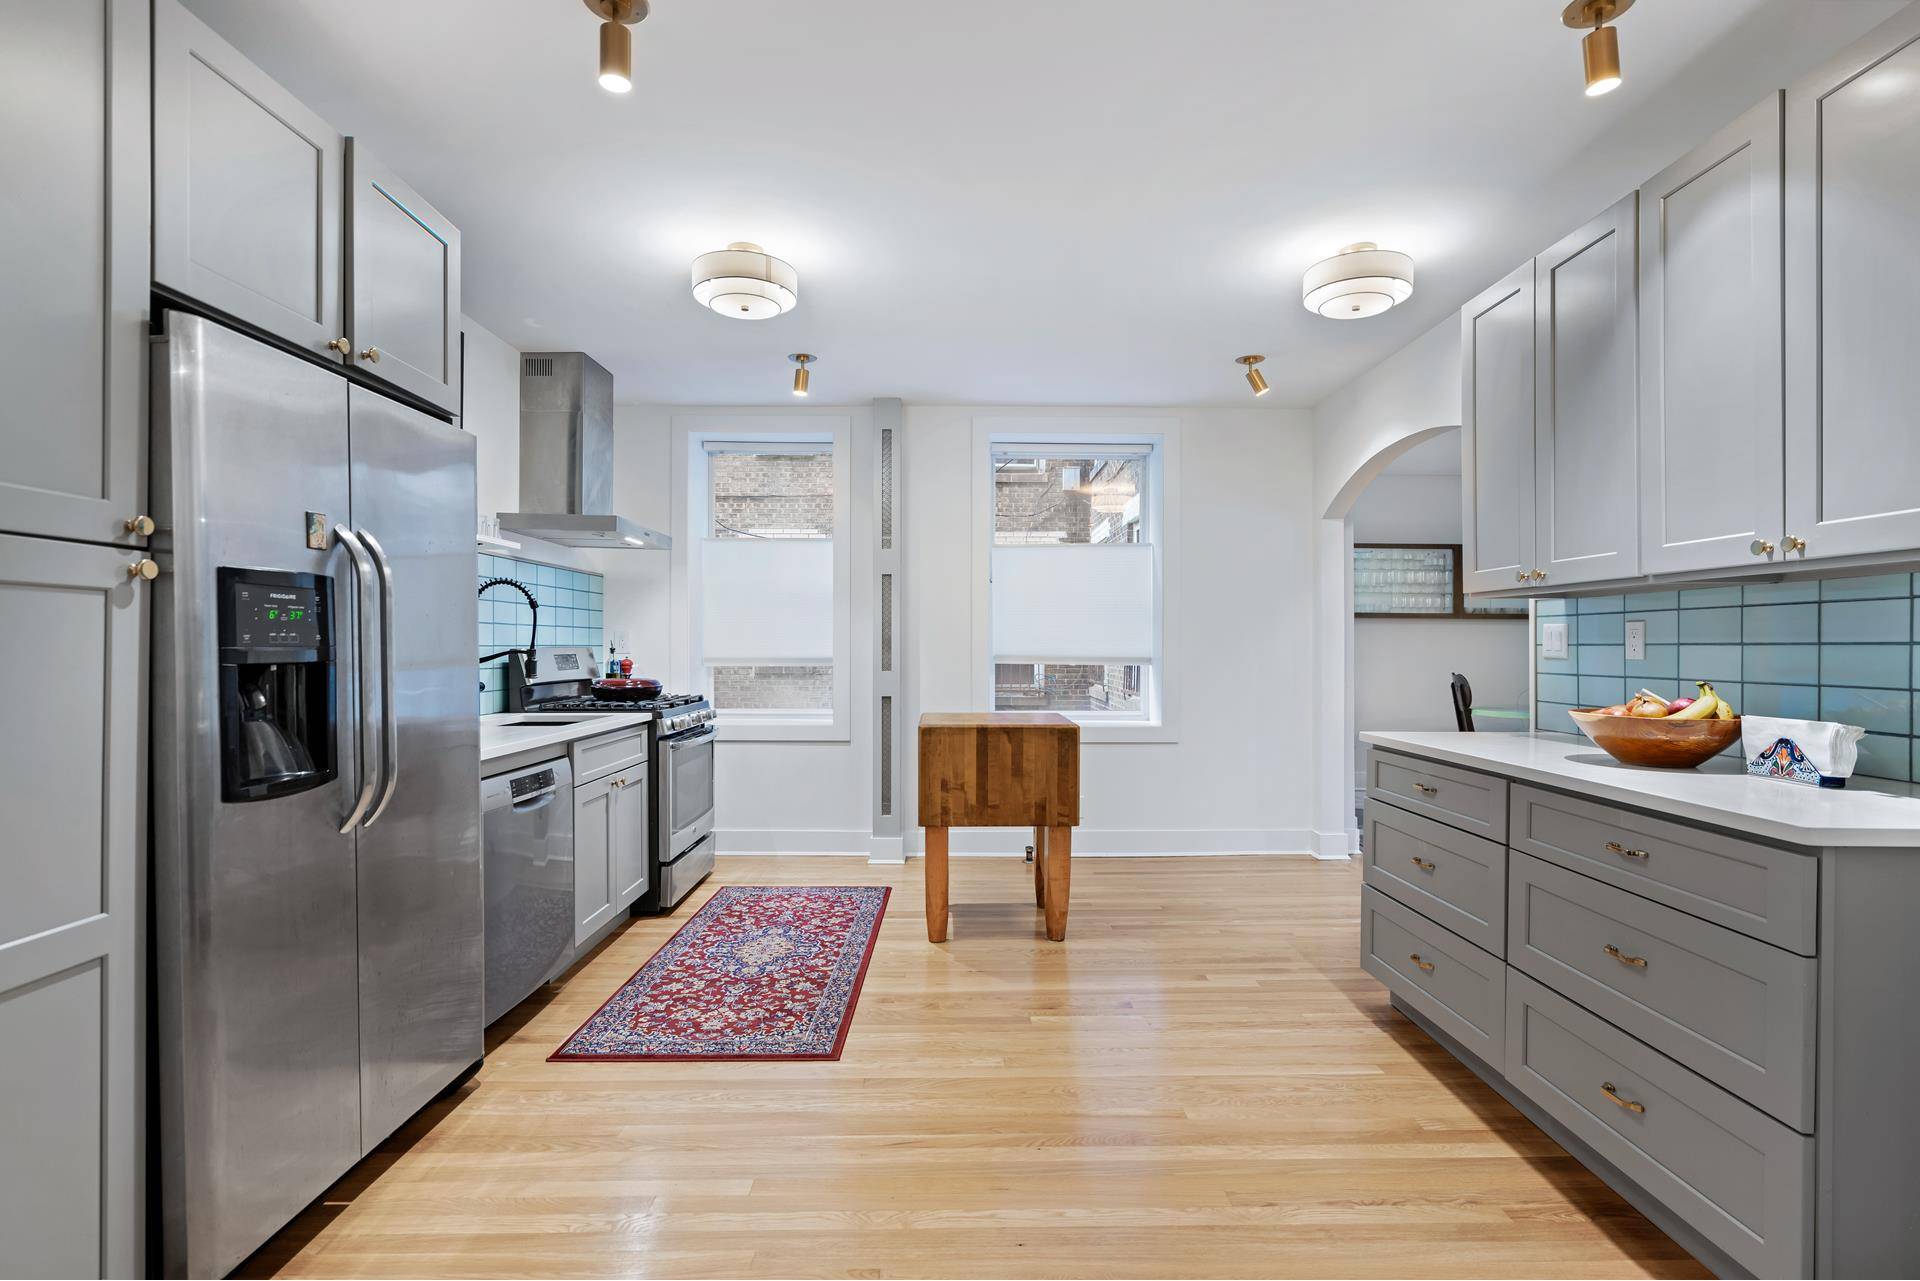 Move in ready amp ; recently renovated, spacious 1100 sq ft approx two bedroom in Landmarked Grand Concourse building with sleek kitchen and bath.